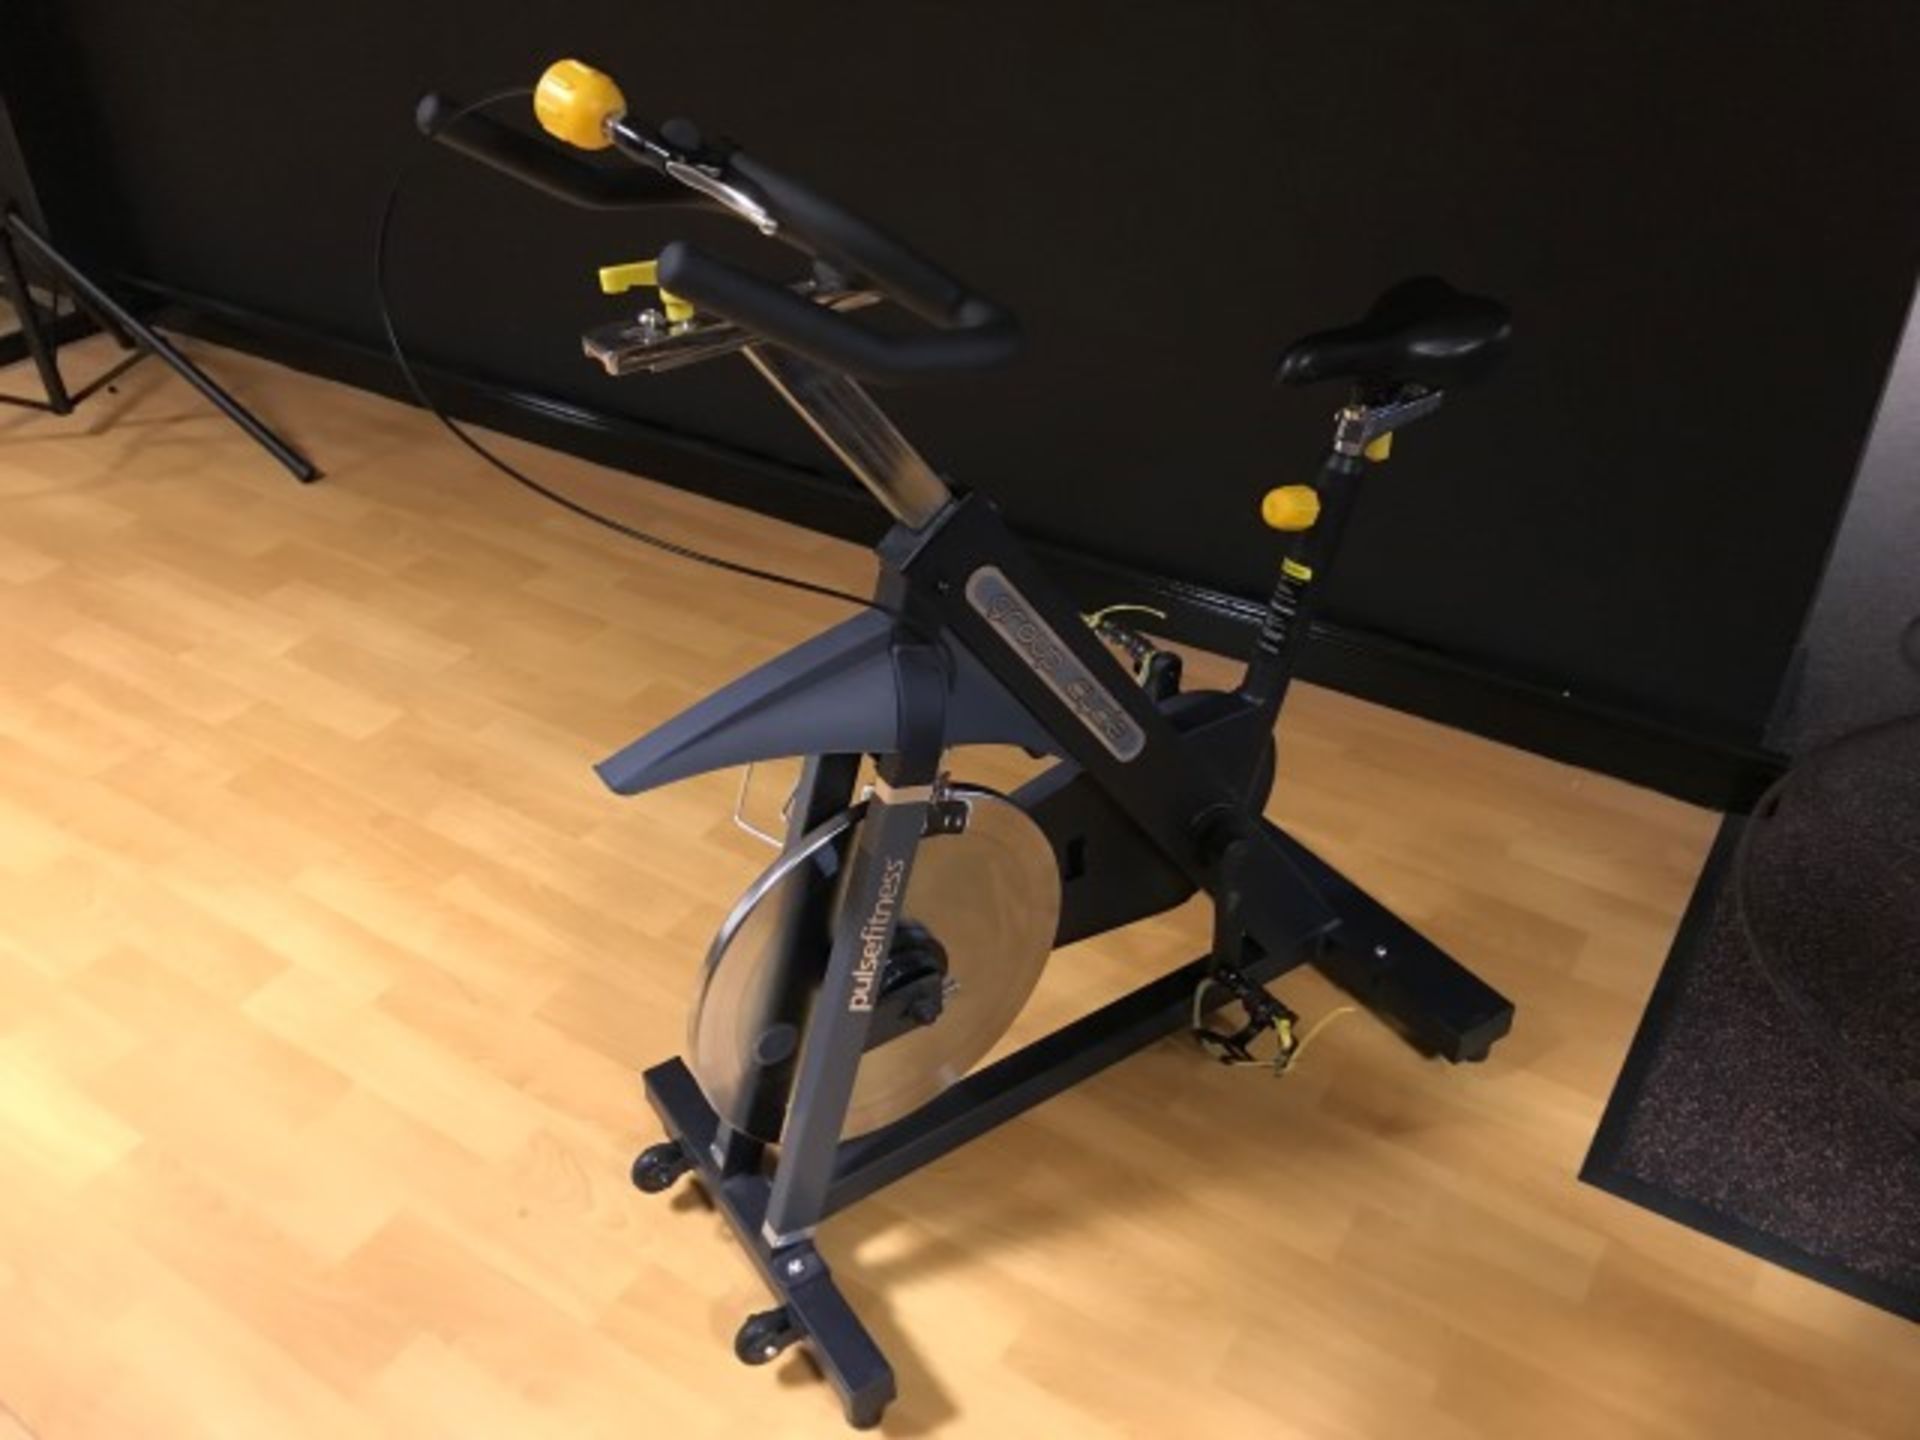 Pulse Fitness 225G Group Cycle spinning bicycle (2017)